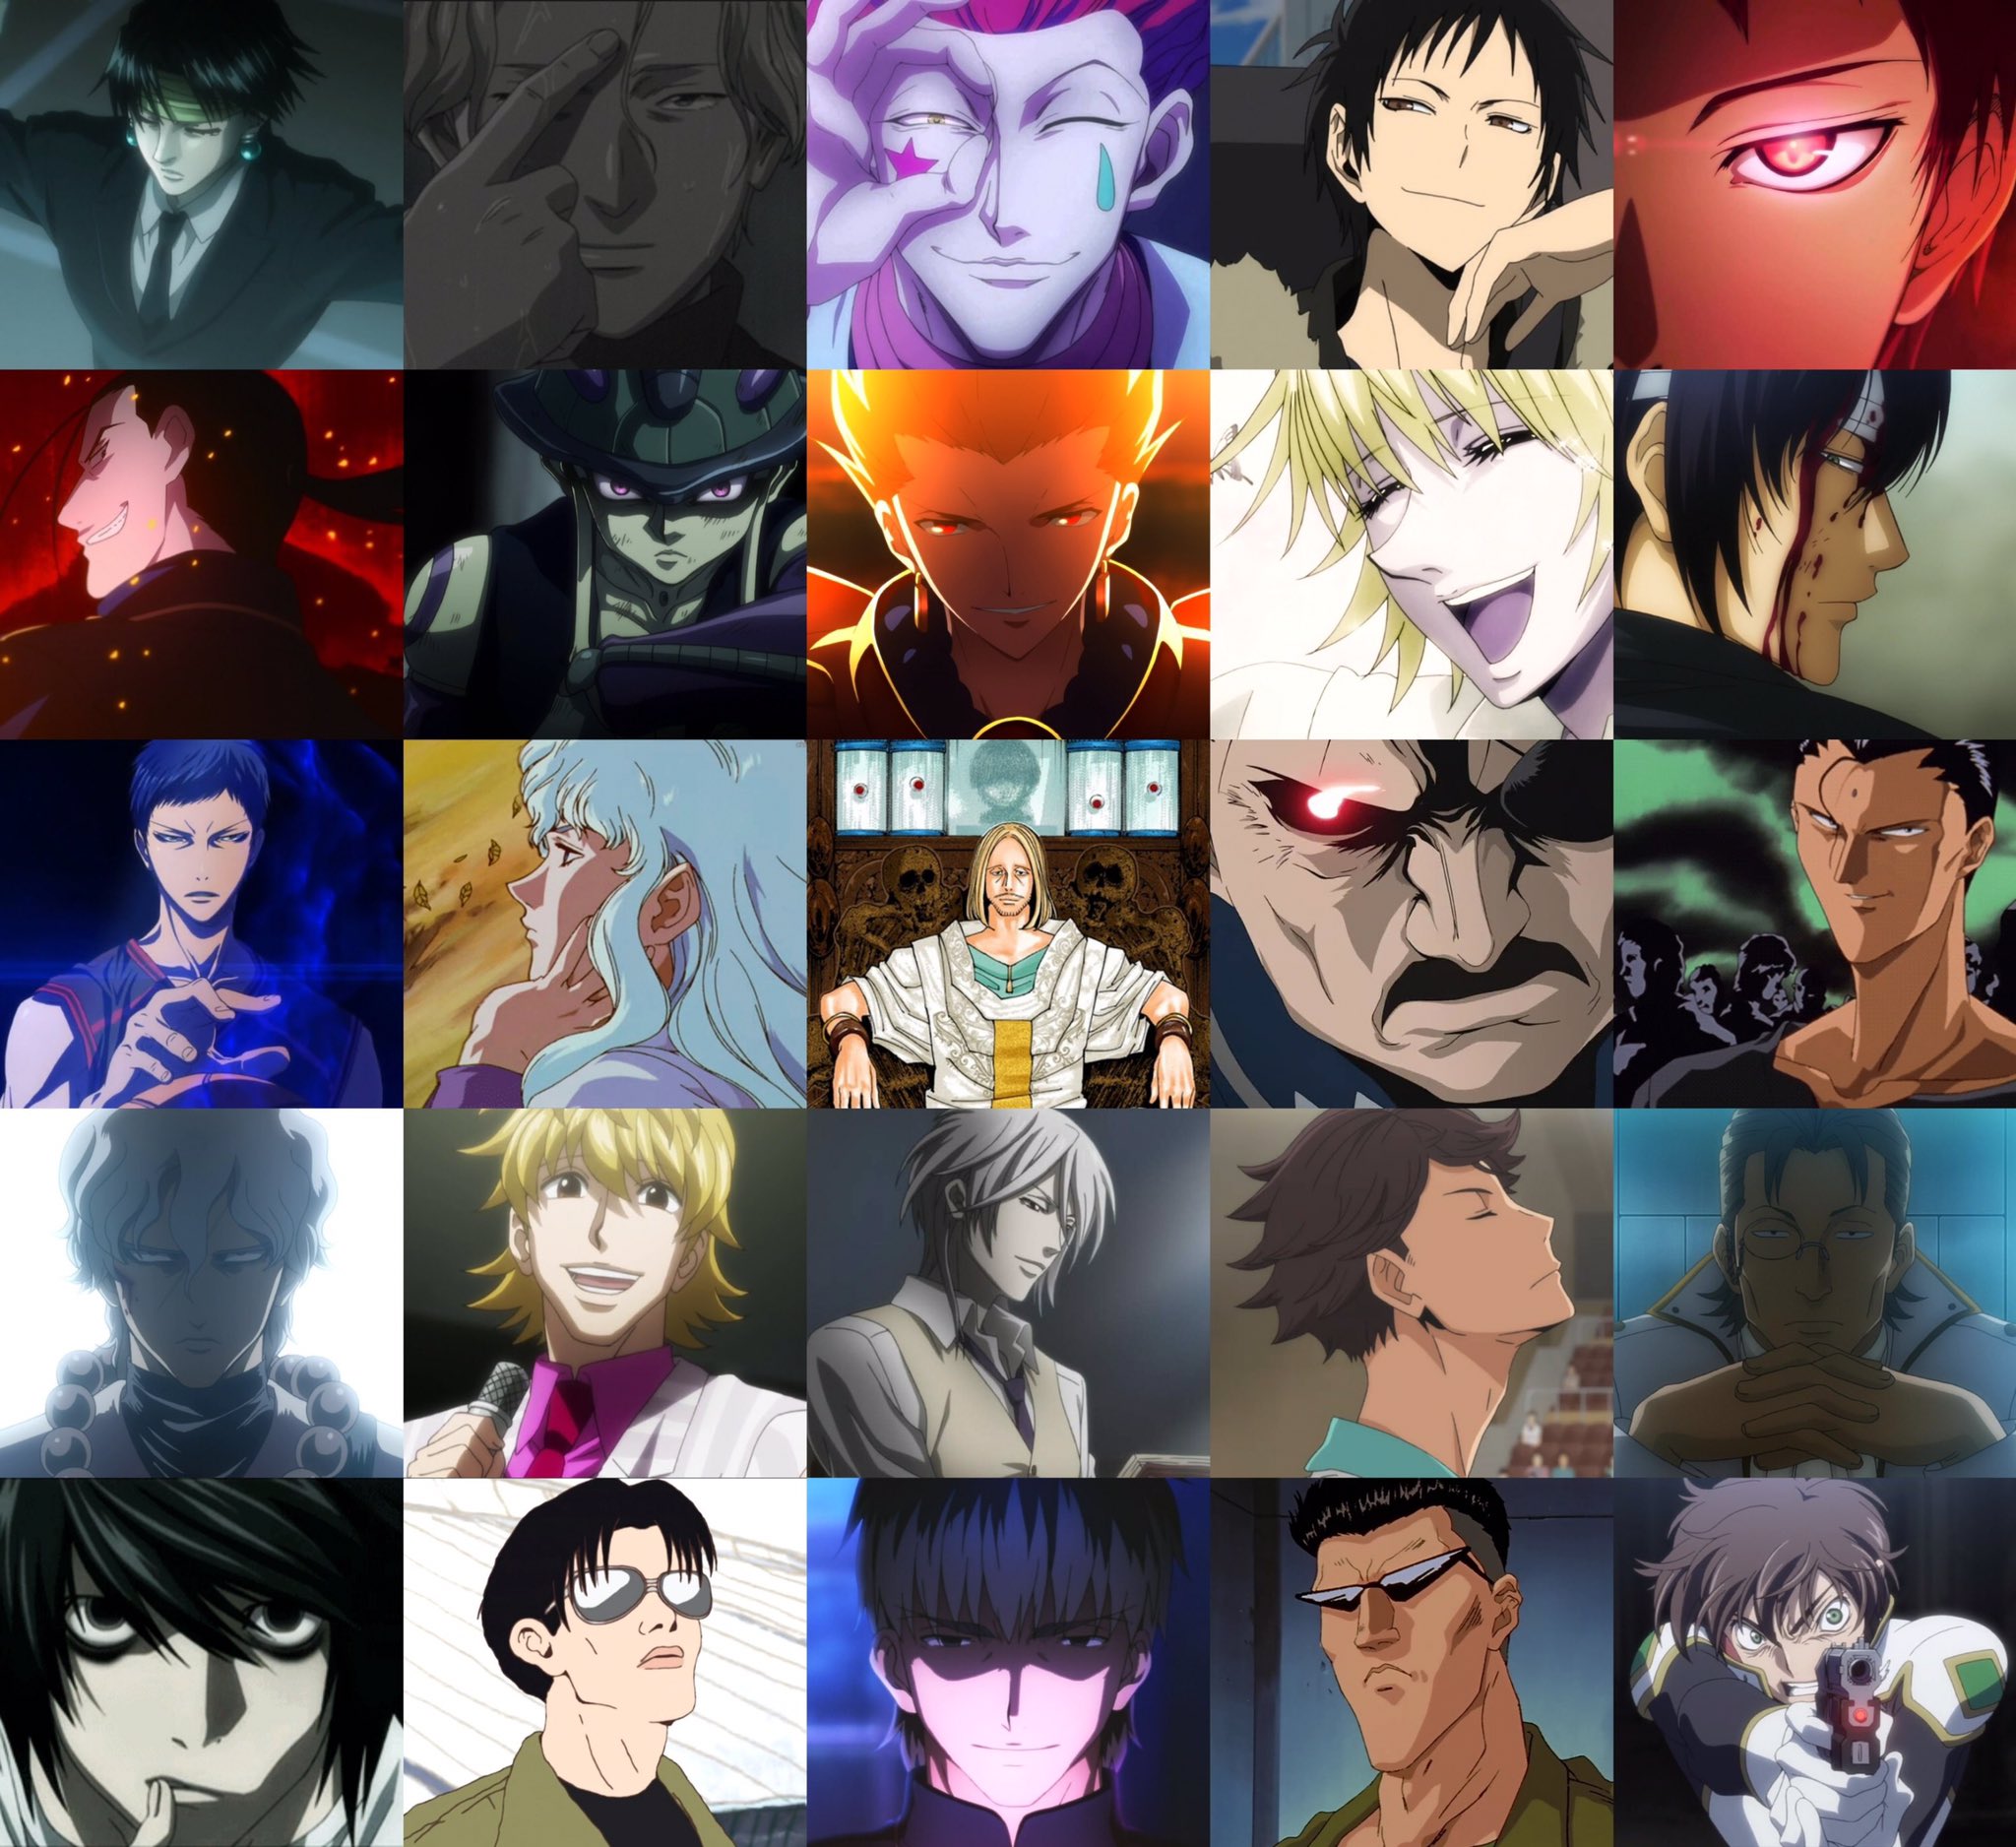 10 Best Anime Antagonists From 2020 According To MyAnimeList